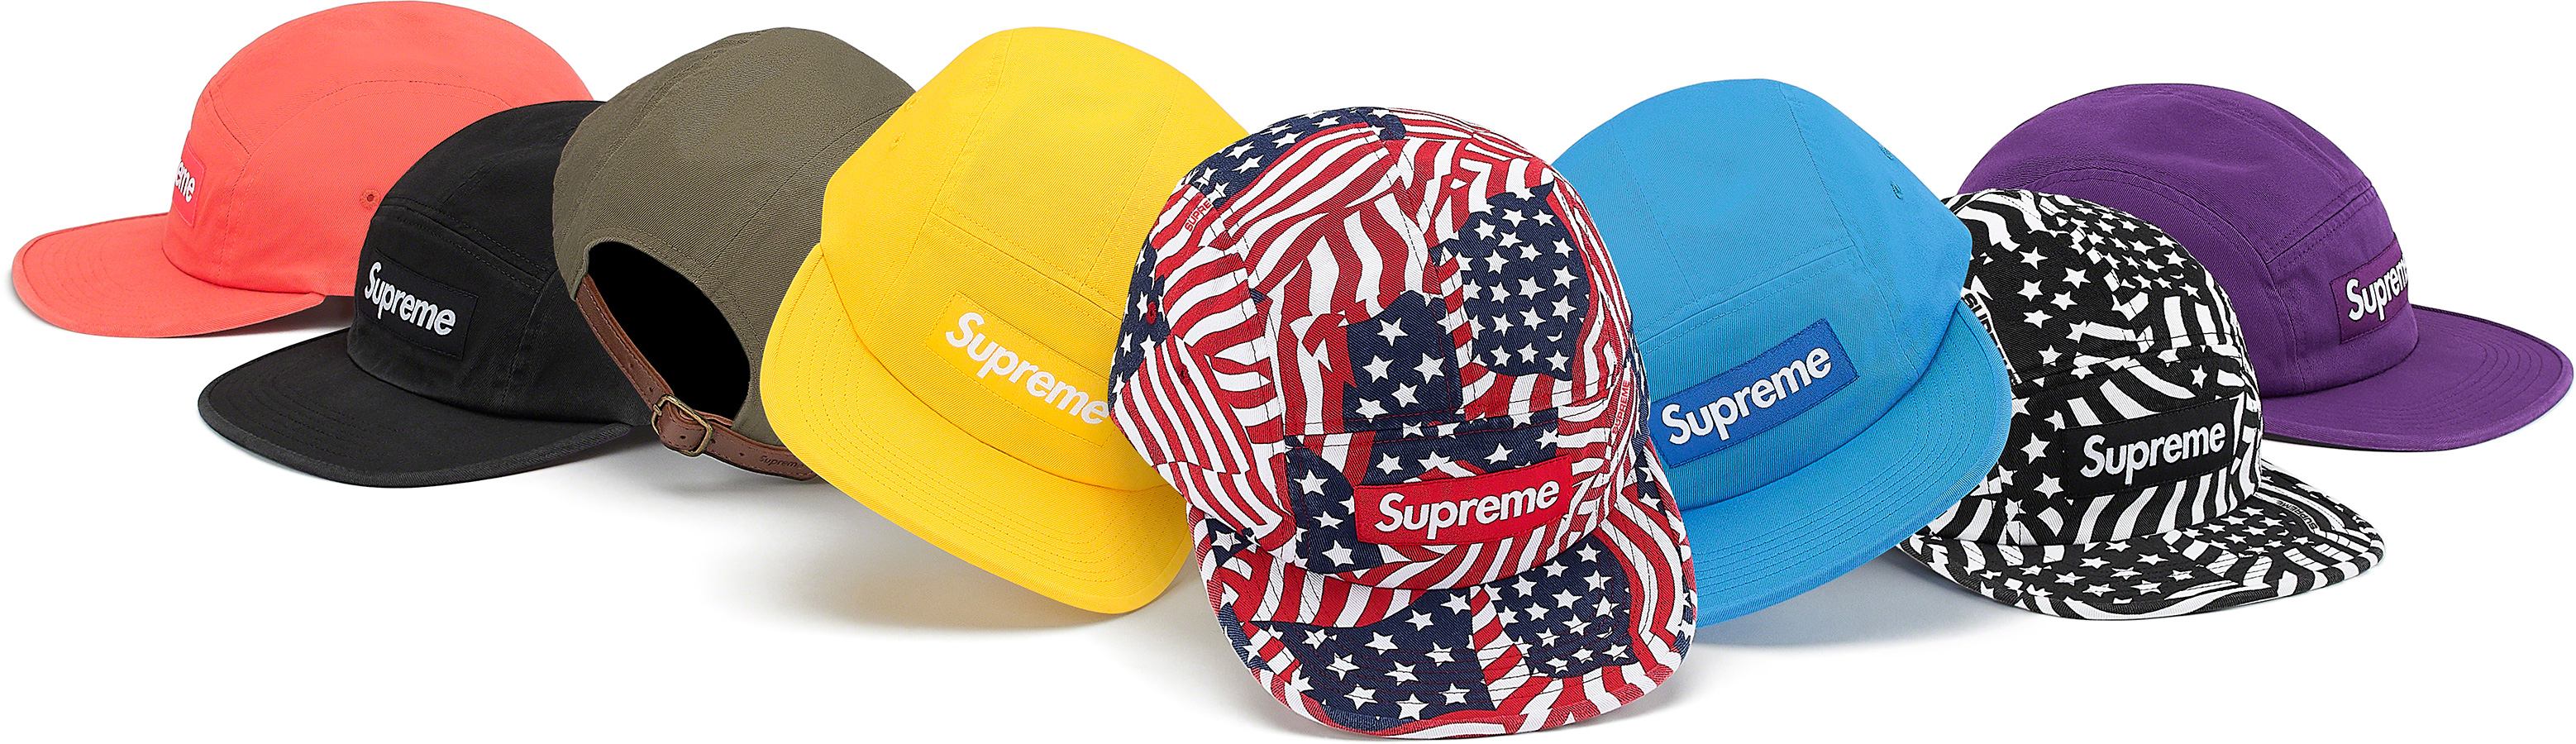 Supreme Washed Chino Twill Camp Cap 20ss | eclipseseal.com